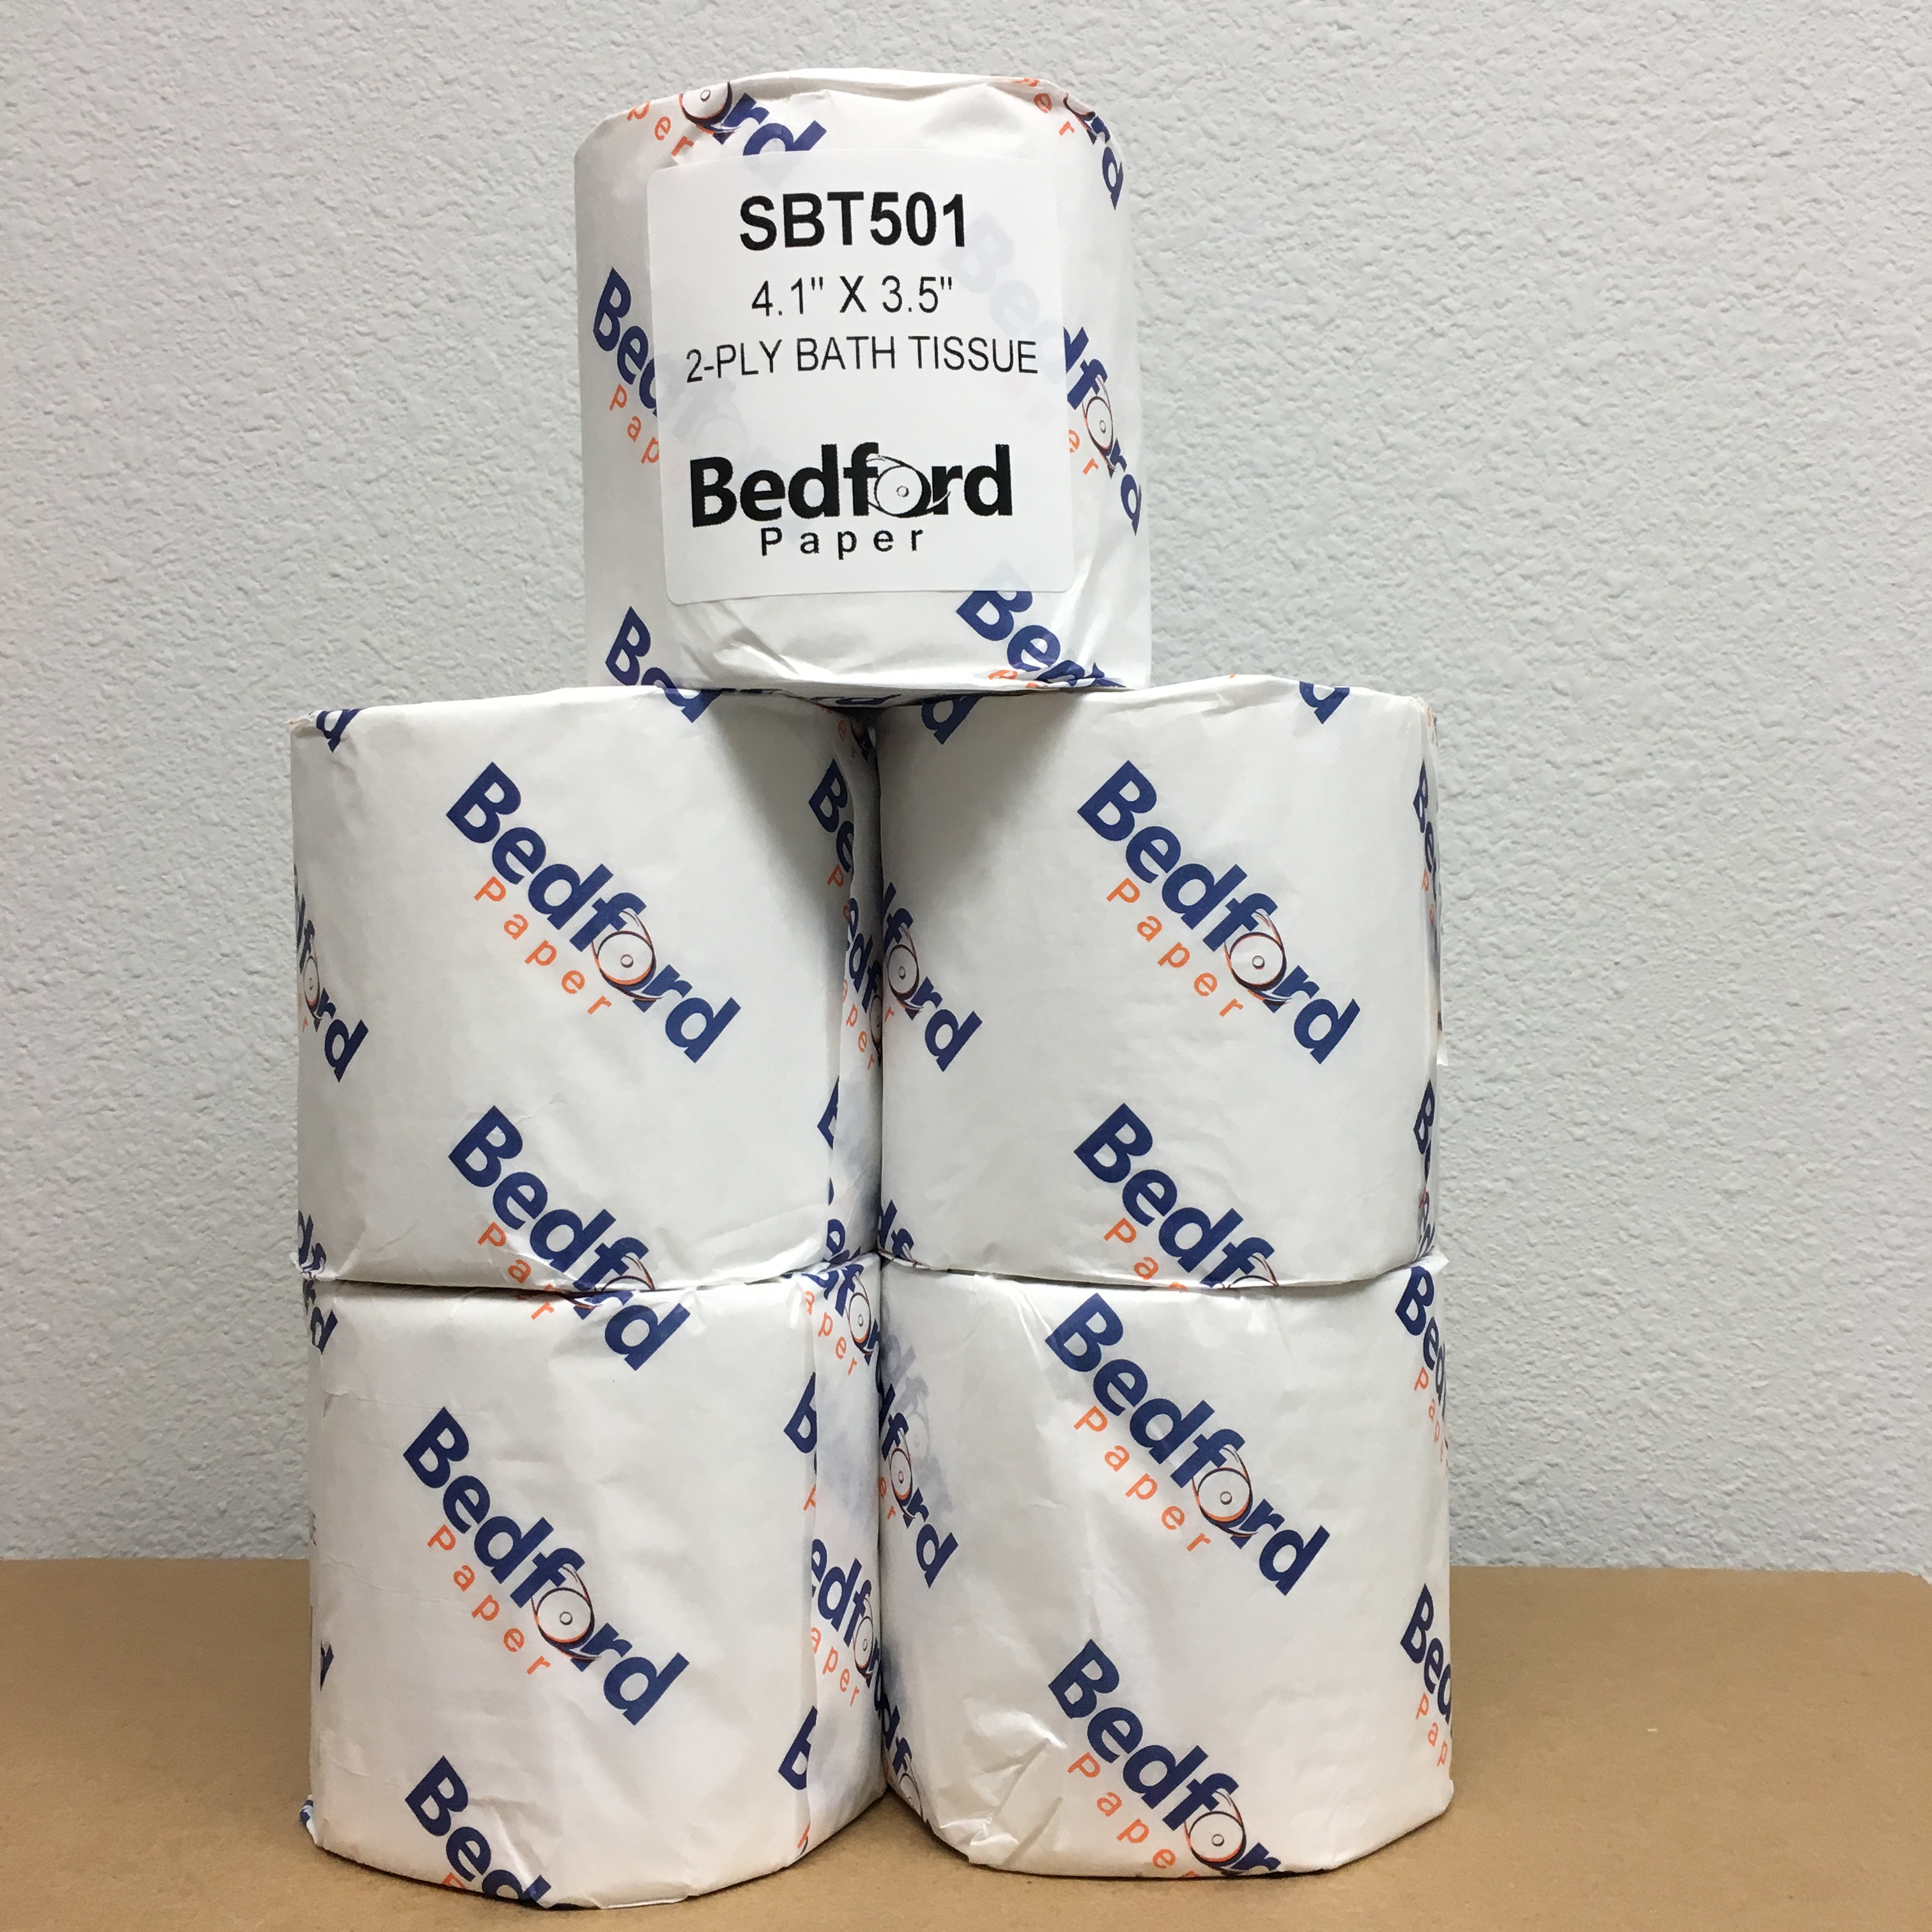 TOILET TISSUE 2-PLY BEDFORD
4.1 X 3.50 500 SHEETS PER
ROLL (96 ROLL CASE)